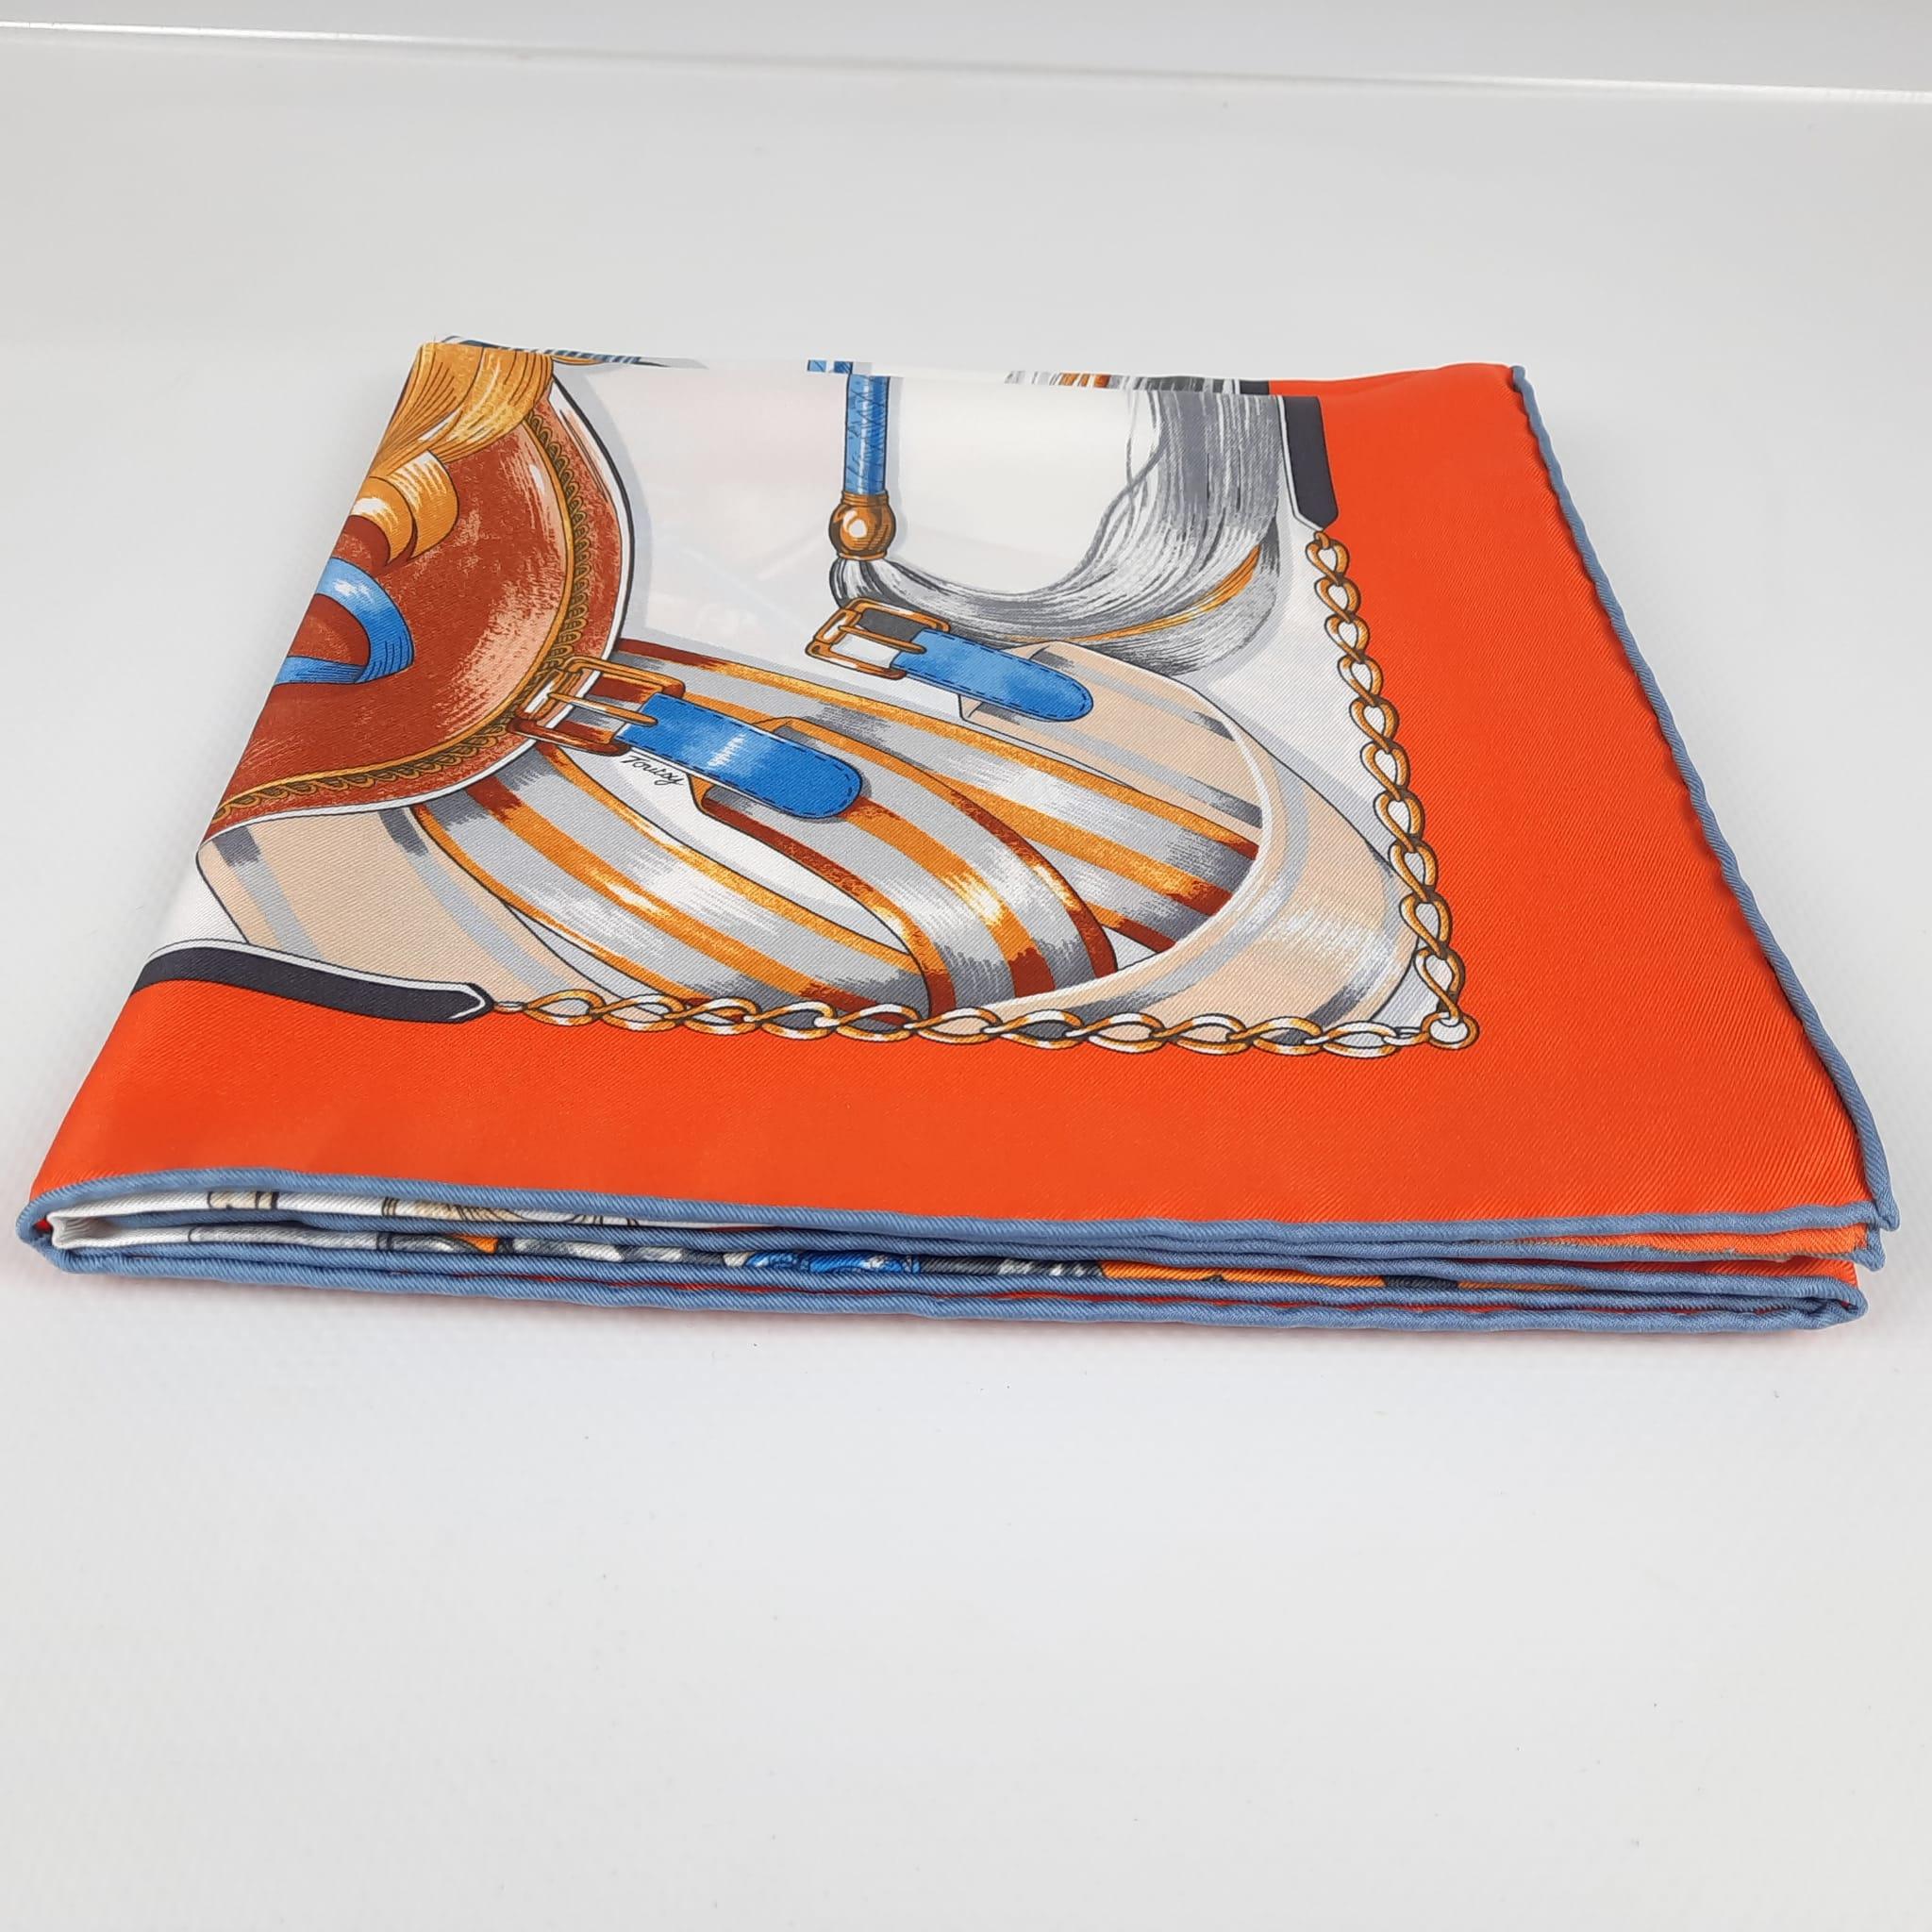 Scarf in silk twill with hand-rolled edges (100% silk).
The Hermès scarf is an infinite source of creativity and storytelling that constantly evolves thanks to the new designs and color combinations offered each season.
This essential Hermès